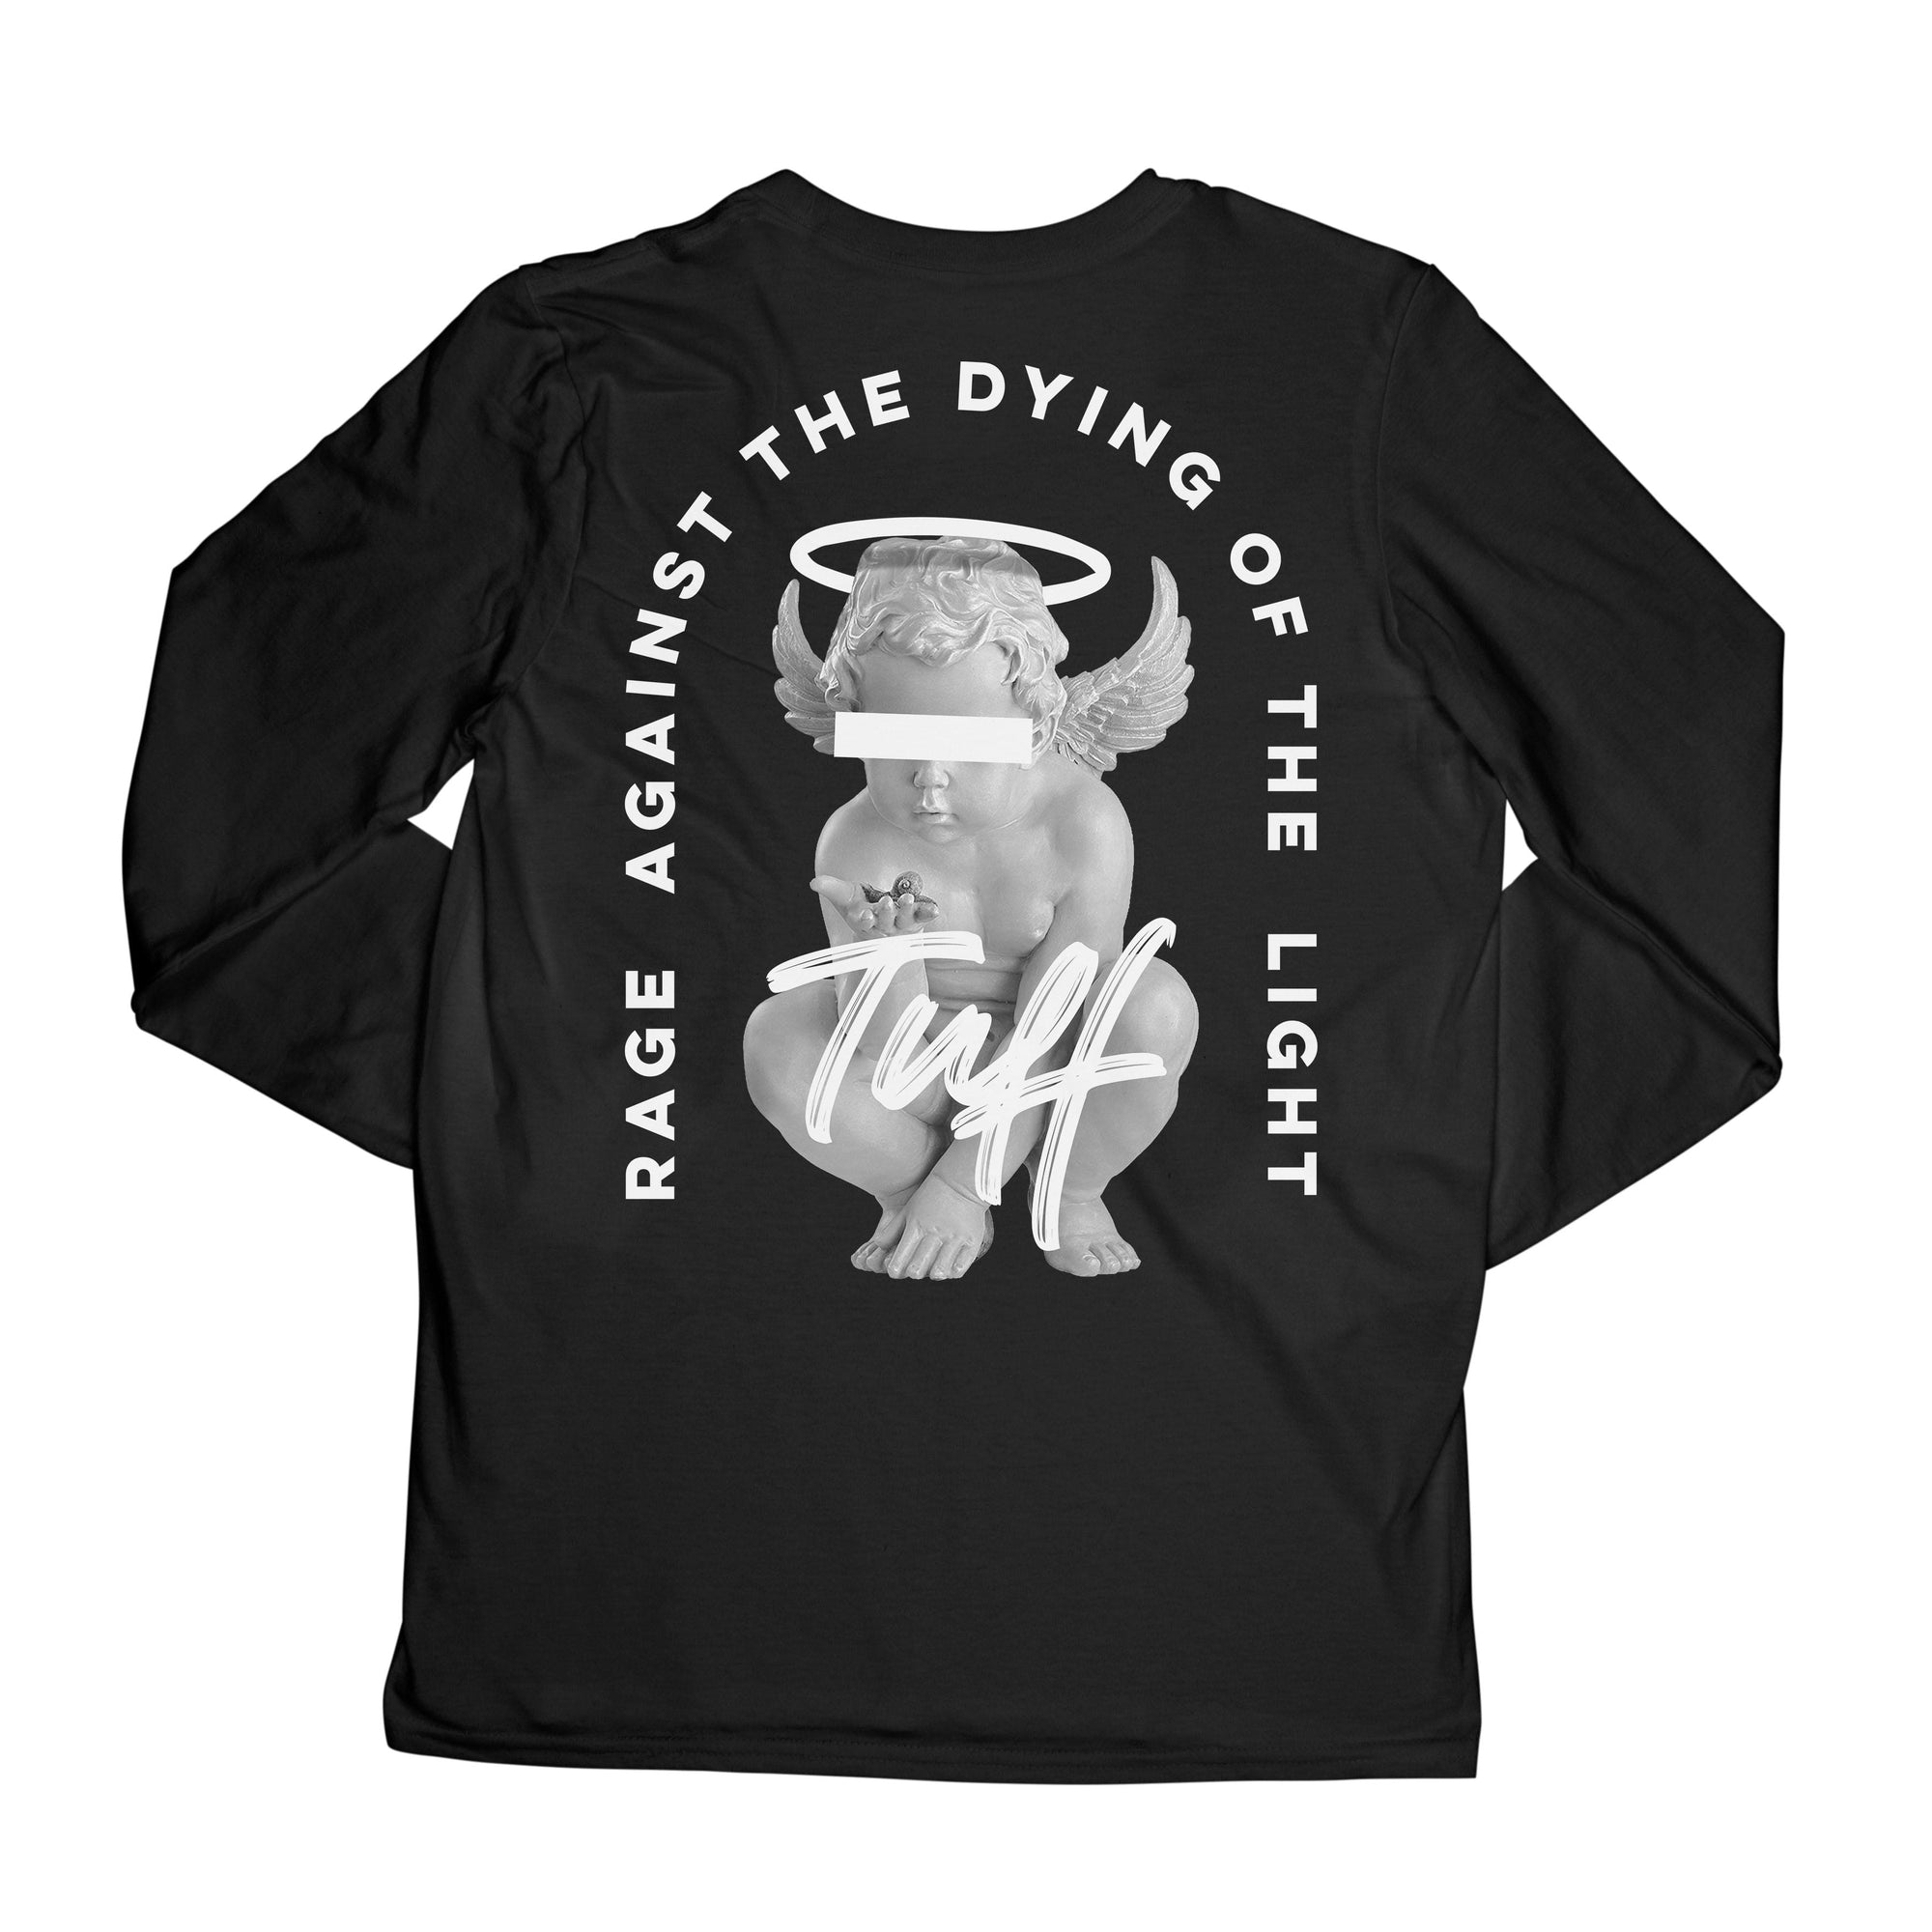 Rage Against the Dying of the Light Long Sleeve Tee Men's Long Sleeve T-Shirt